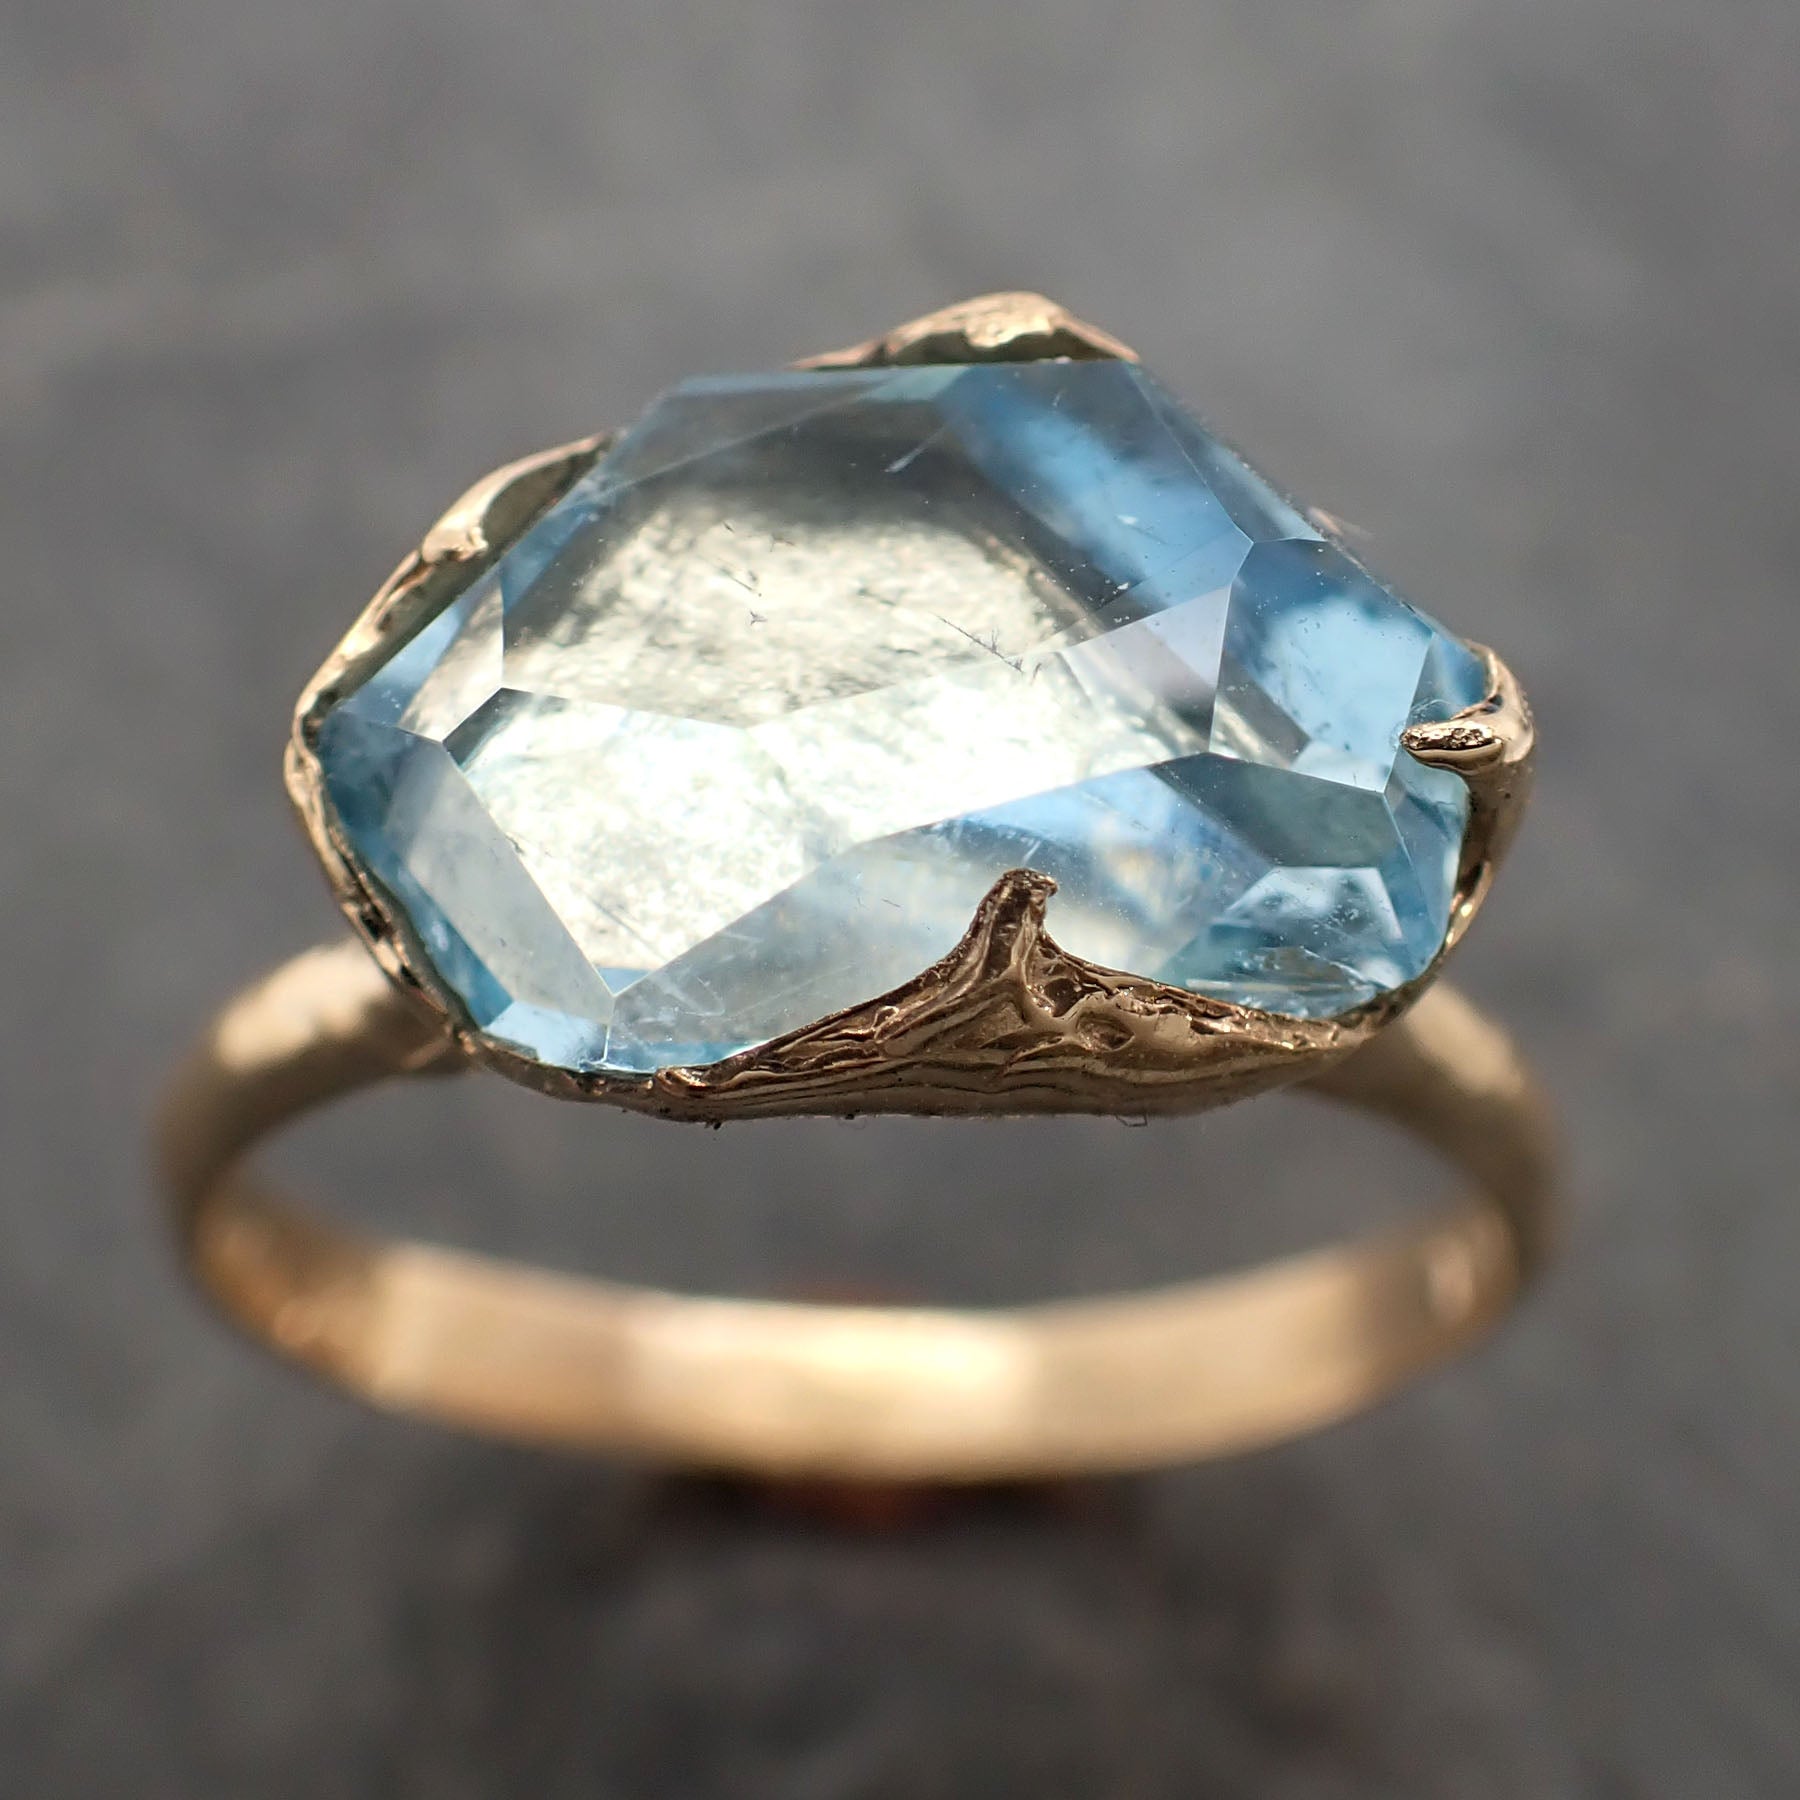 Partially faceted Aquamarine Solitaire Ring 18k gold Custom One Of a Kind Gemstone Ring Bespoke byAngeline 2380